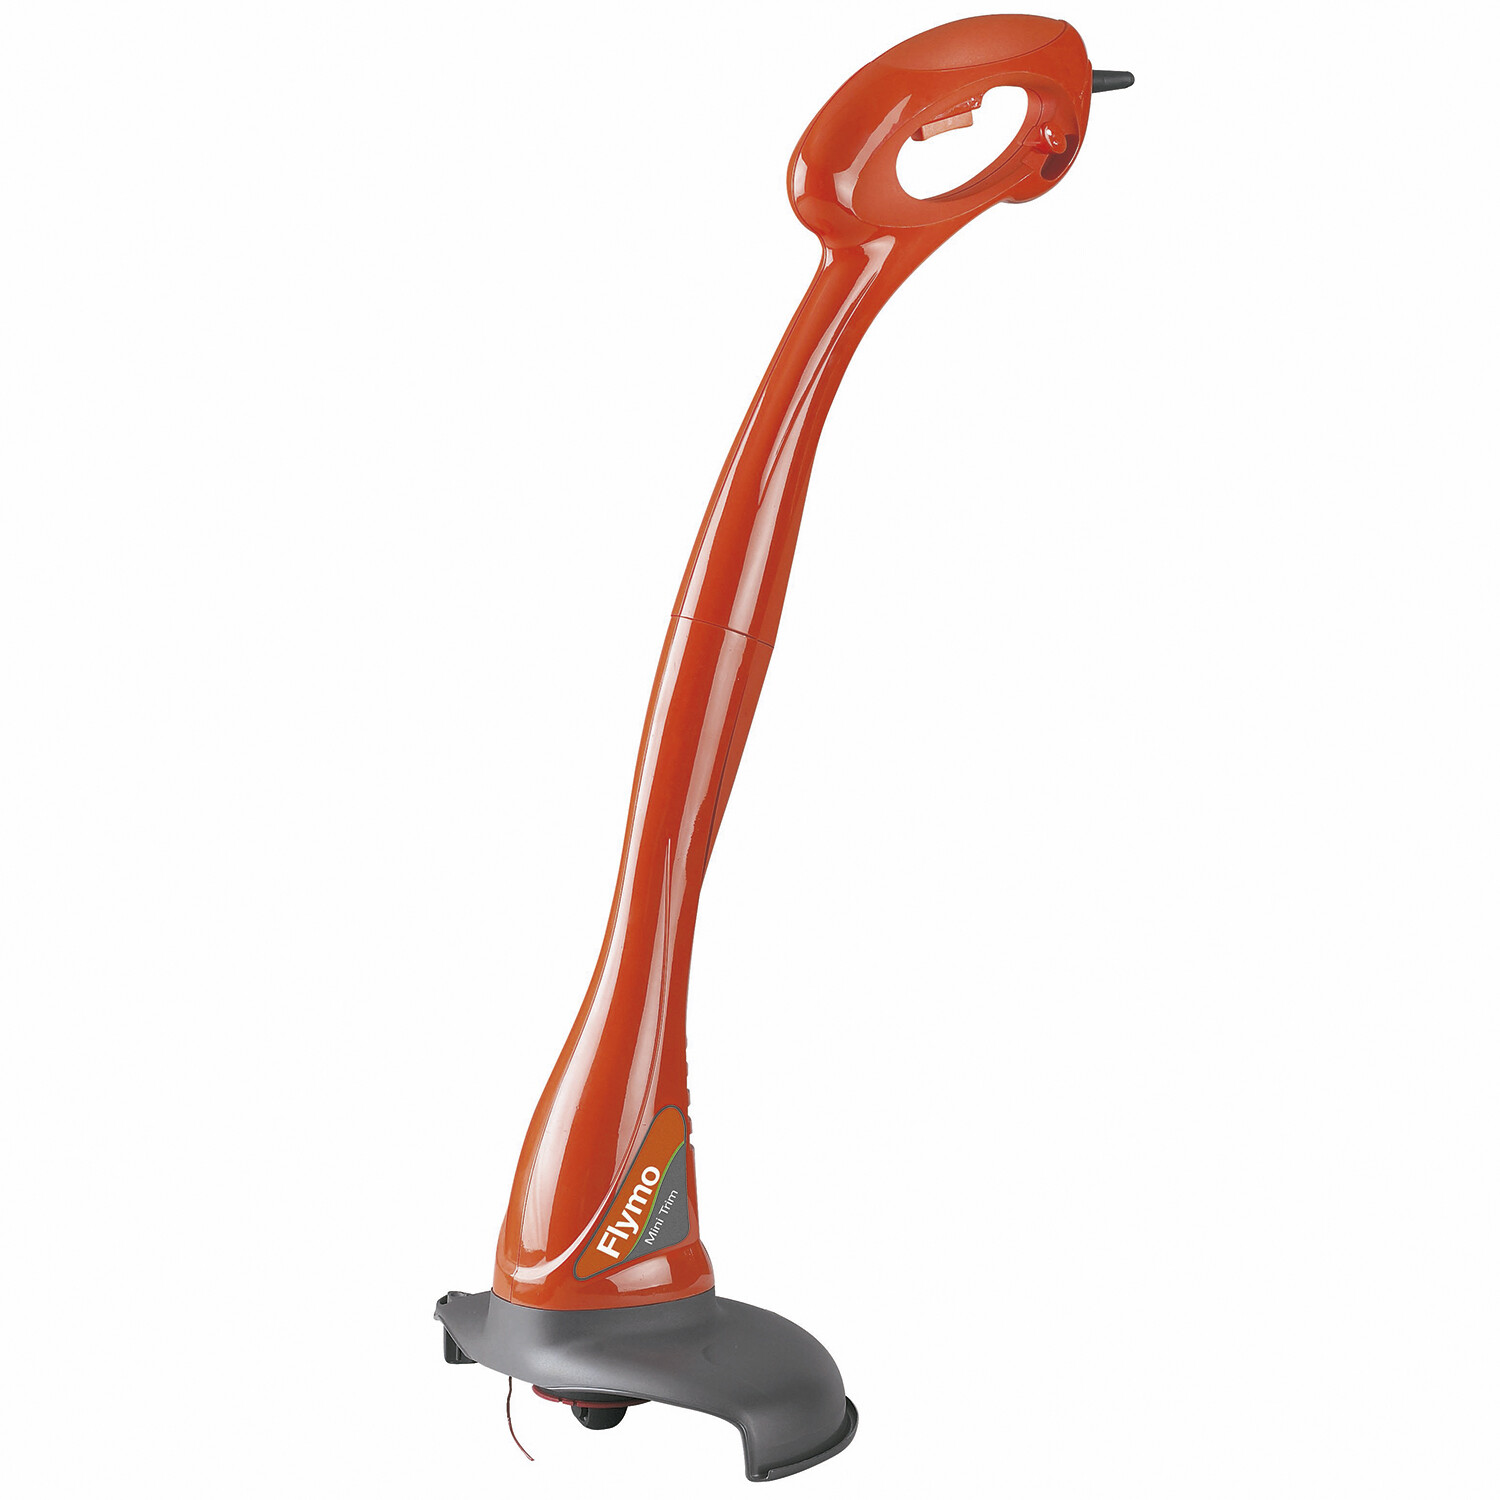 Flymo Red Mini Trim Electric Grass Trimmer Image 1